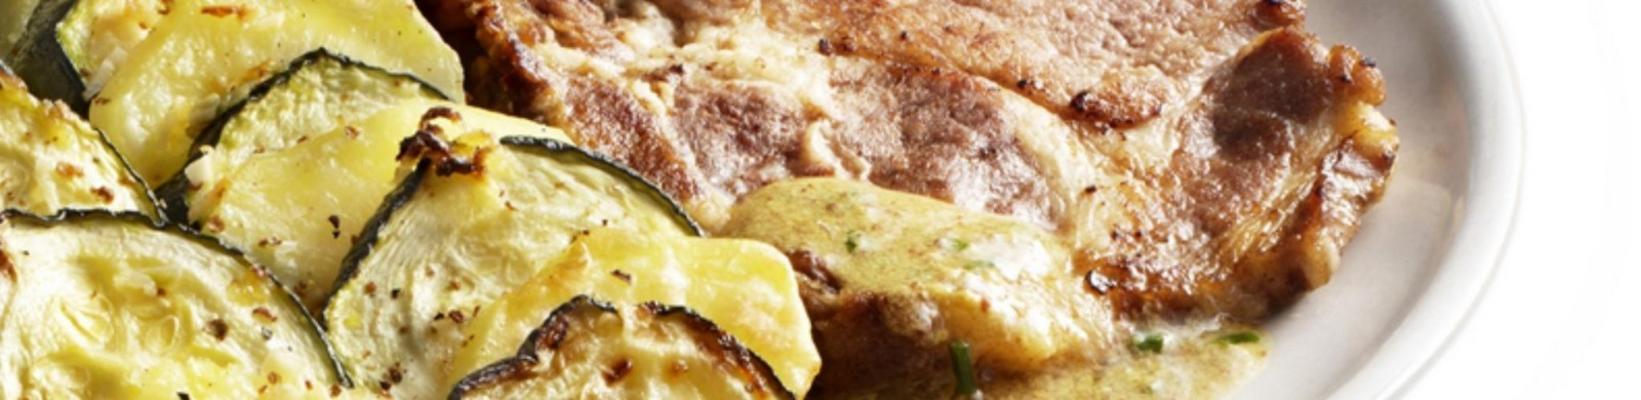 shoulder chop with zucchini gratin and herb mustard